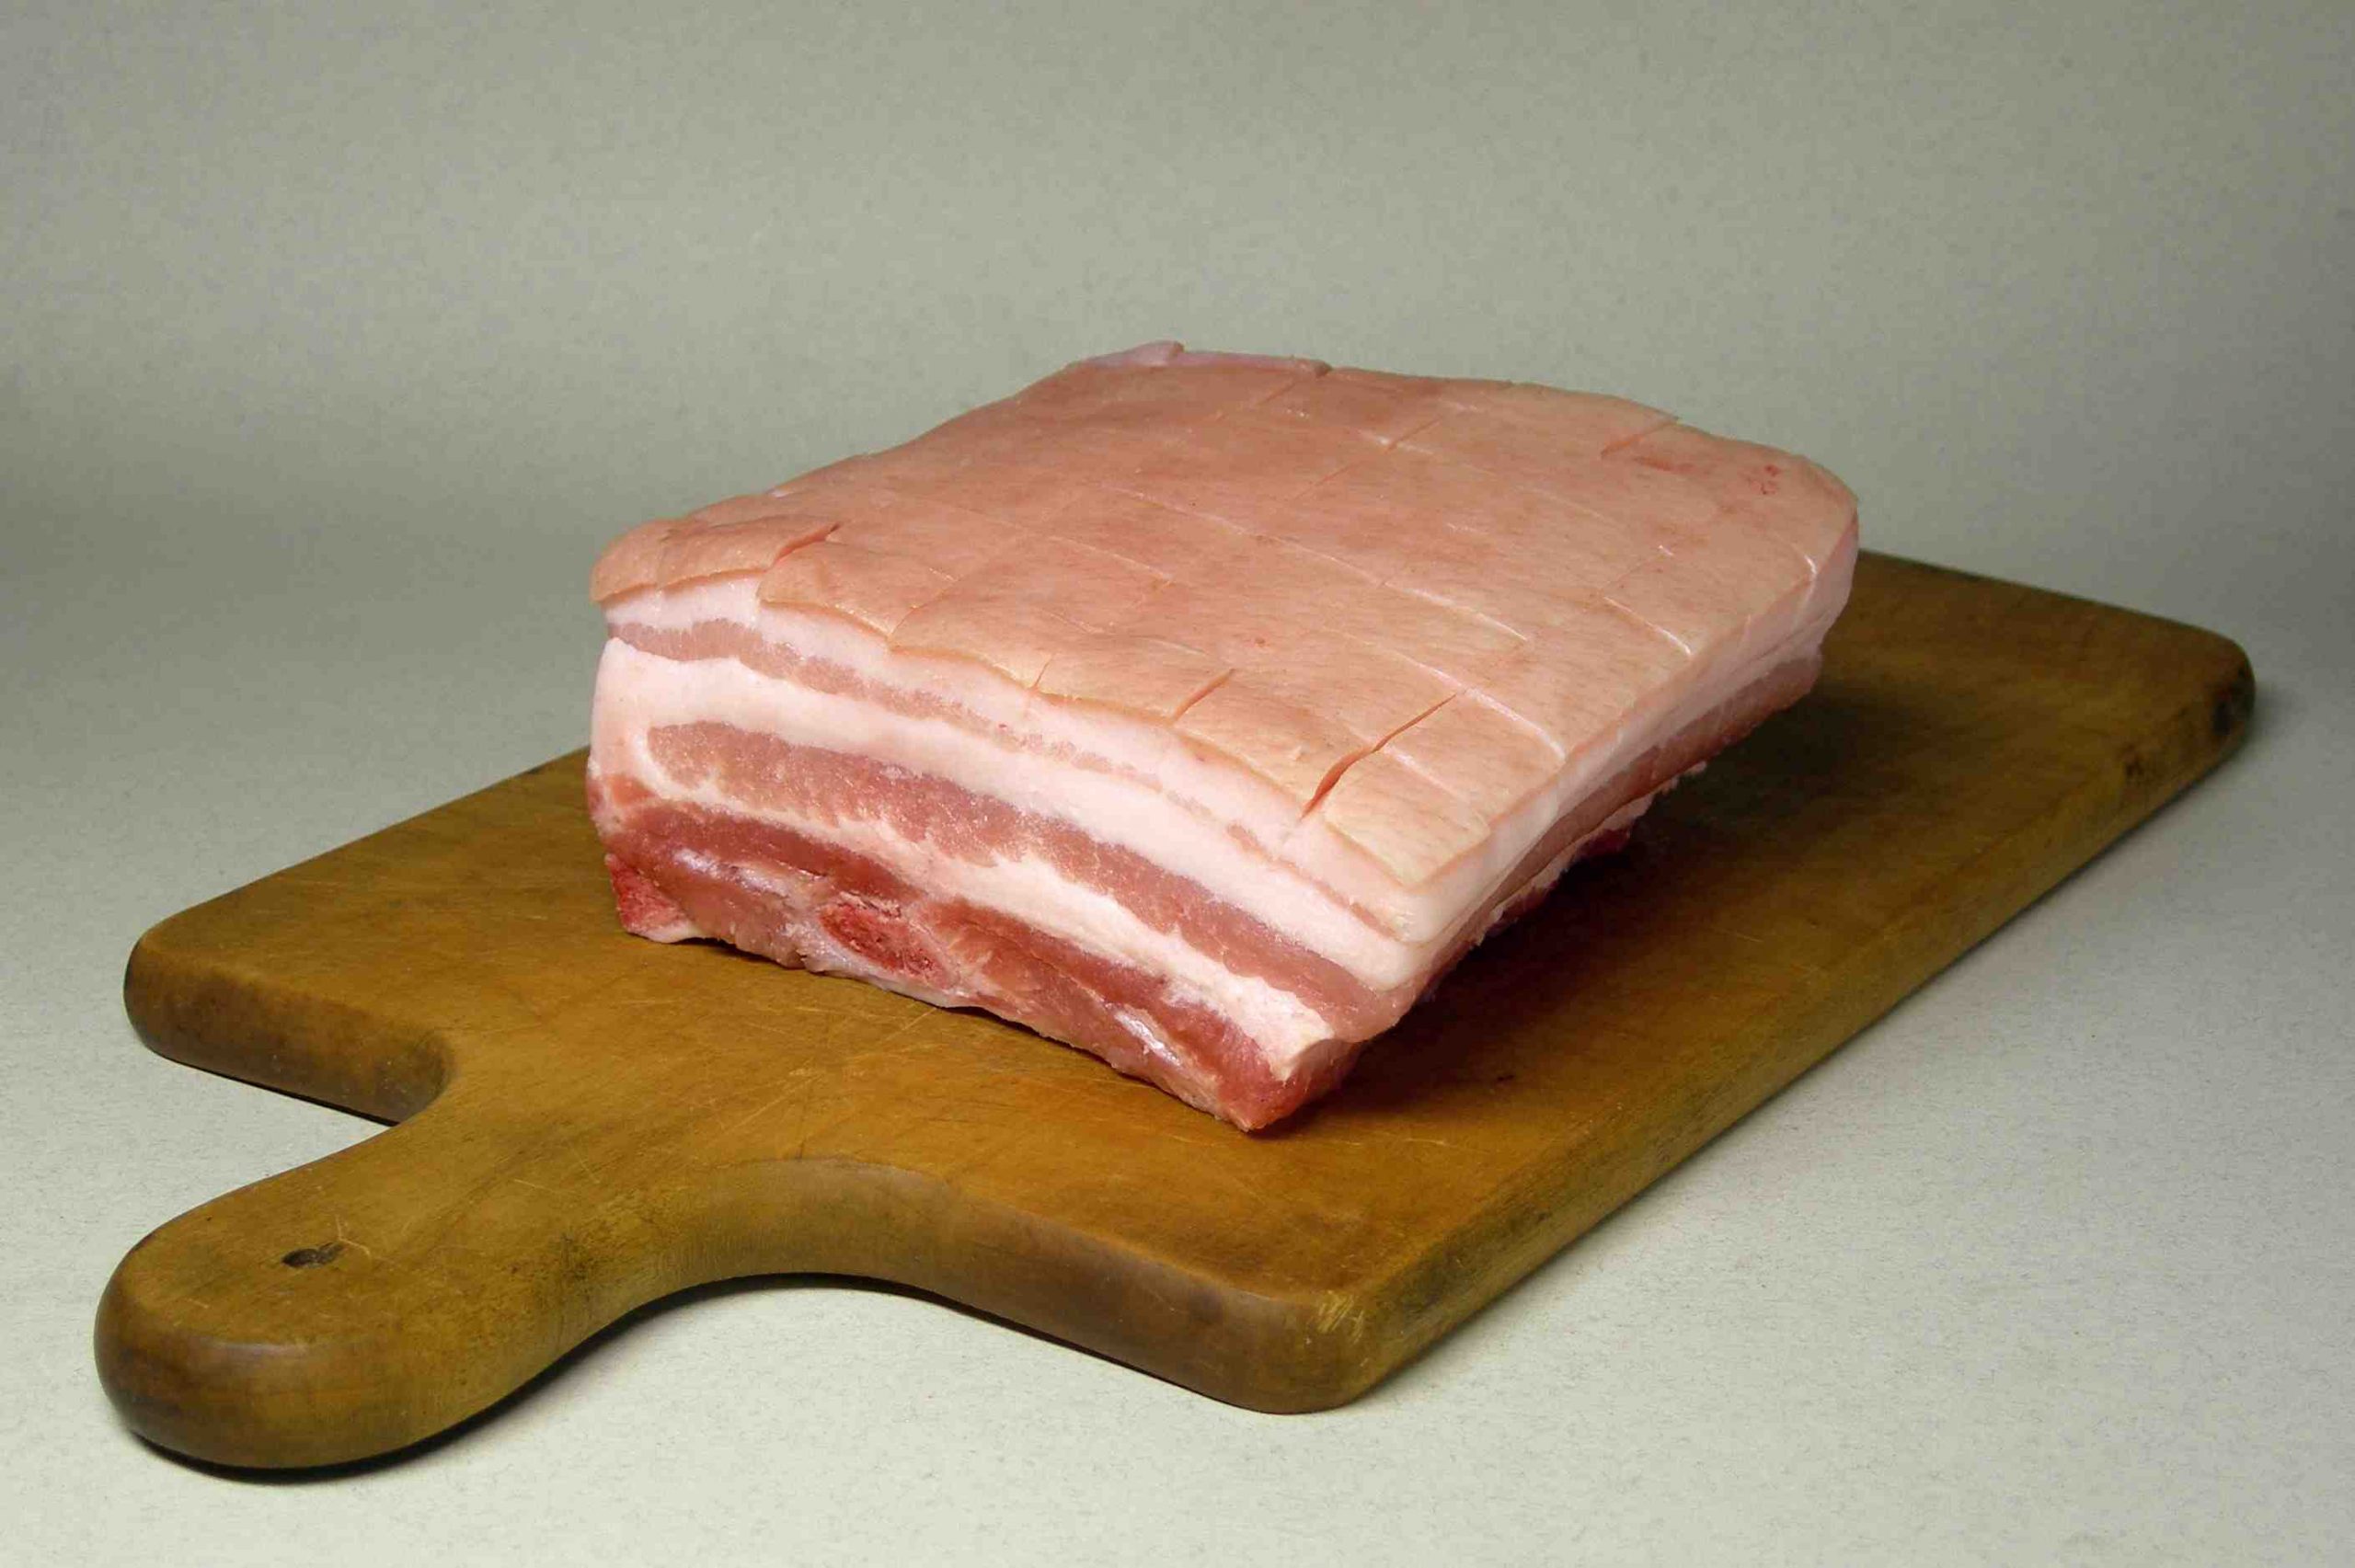 What is the color of fresh pork meat?